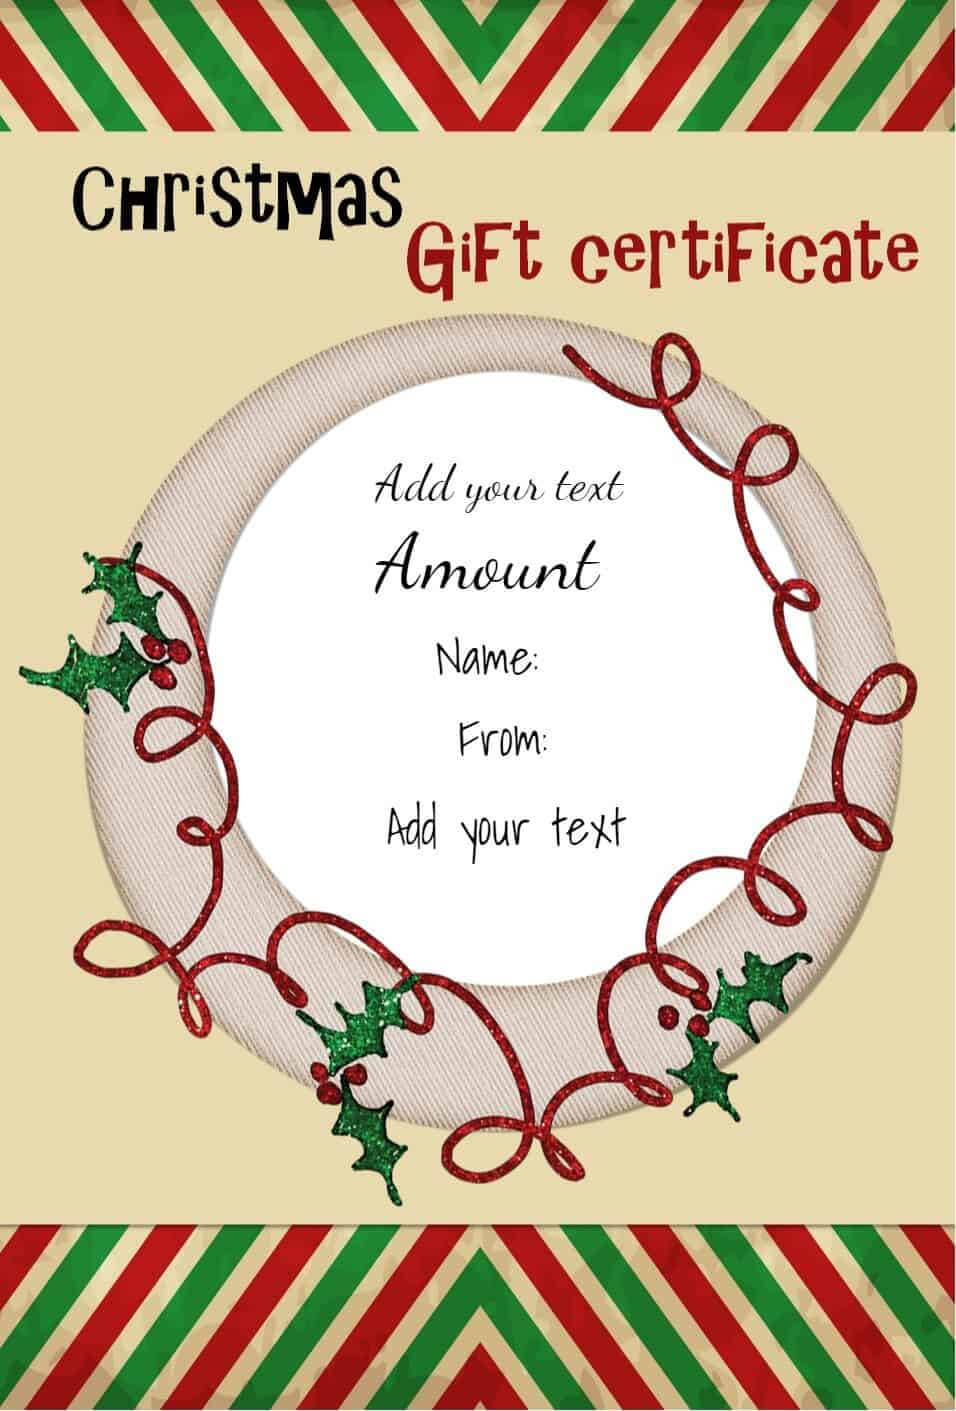 Free Christmas Gift Certificate Template | Customize Online With Free Christmas Gift Certificate Templates